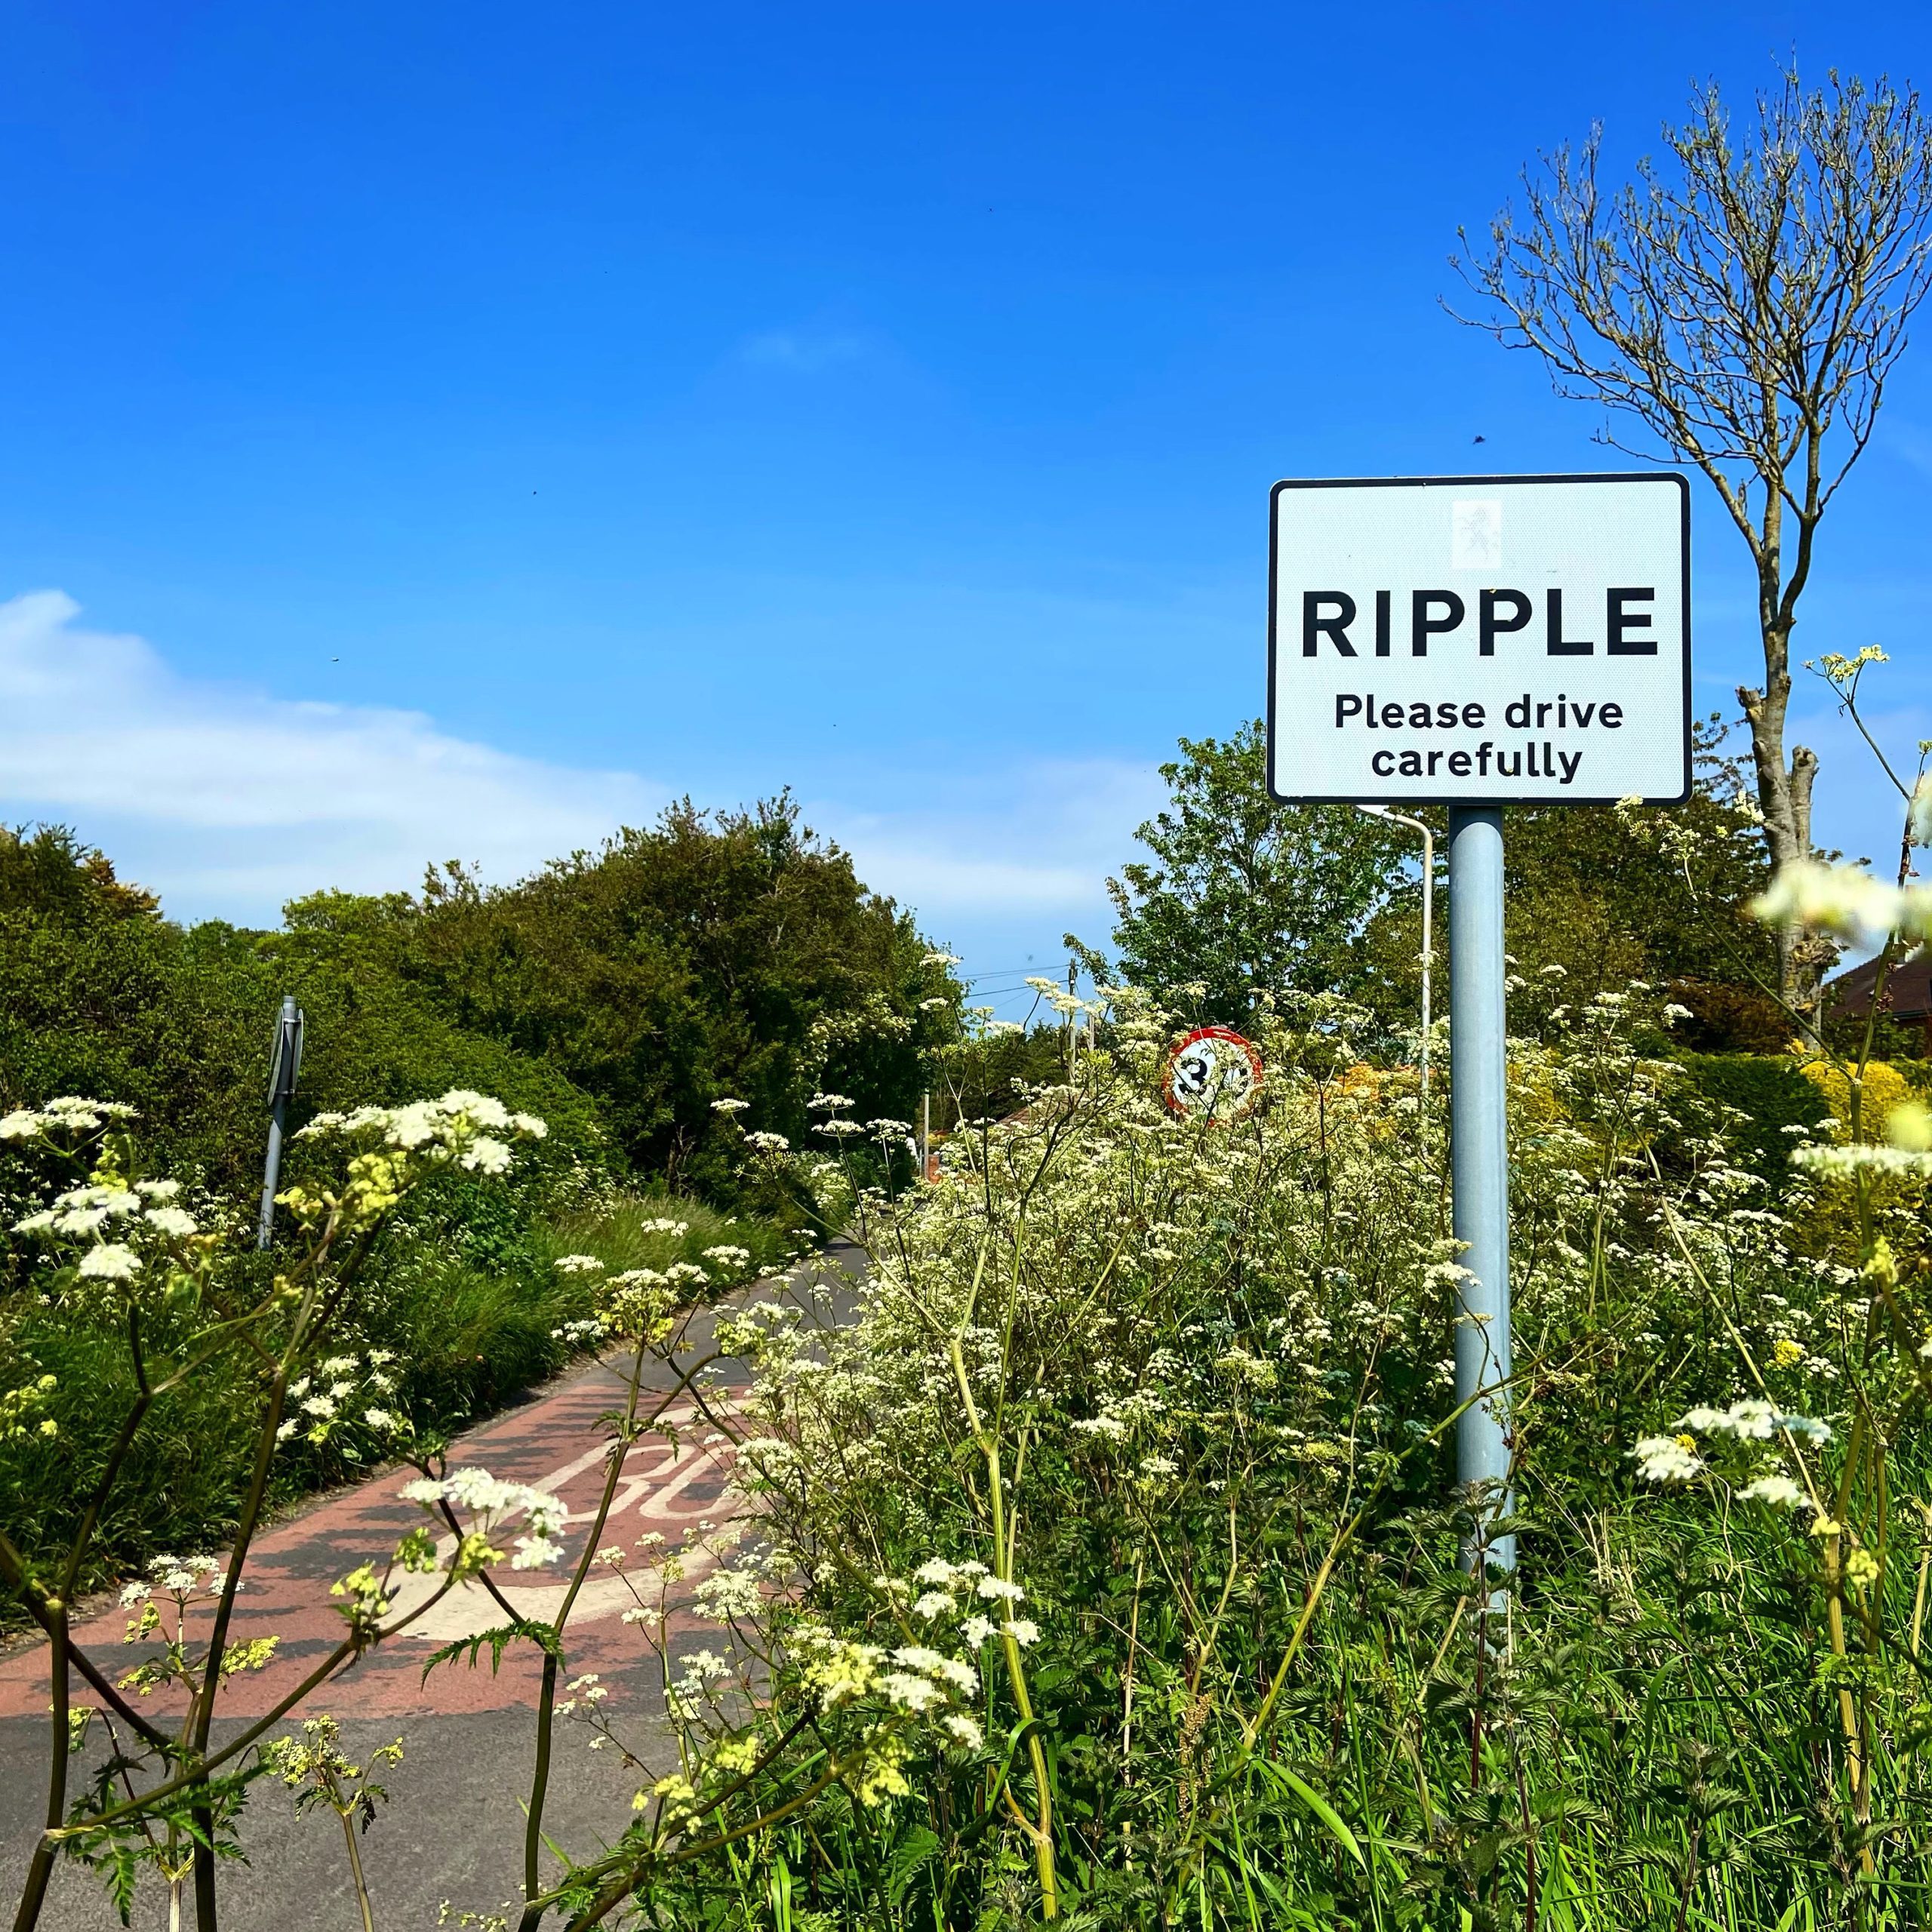 Road sign for Ripple